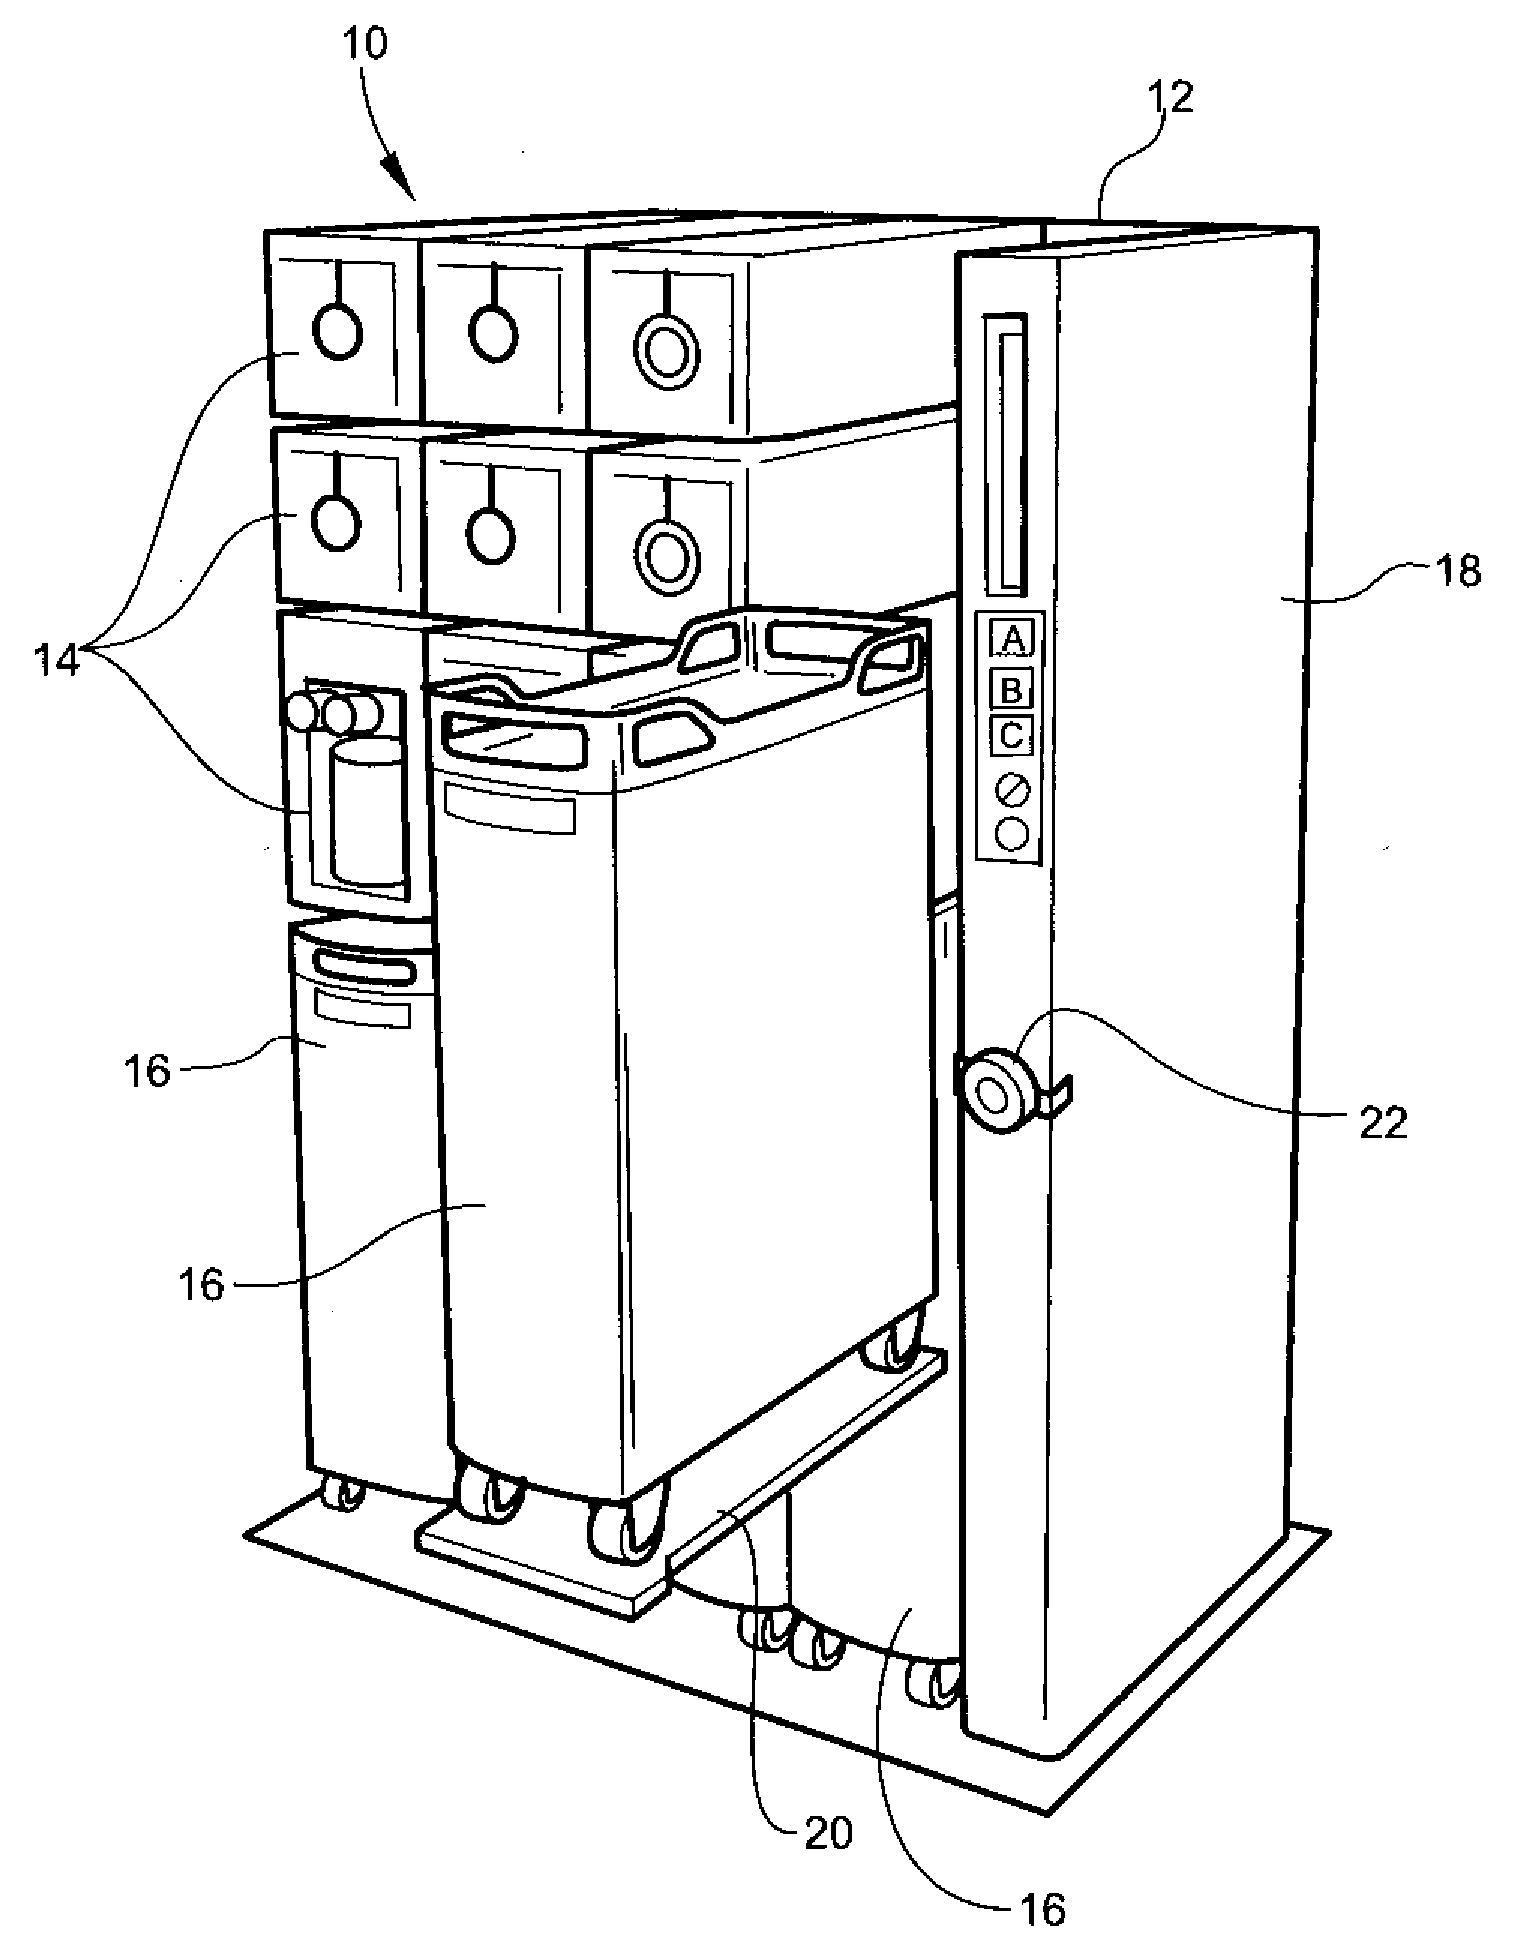 Galley unit with cart lift for elevated cart storage